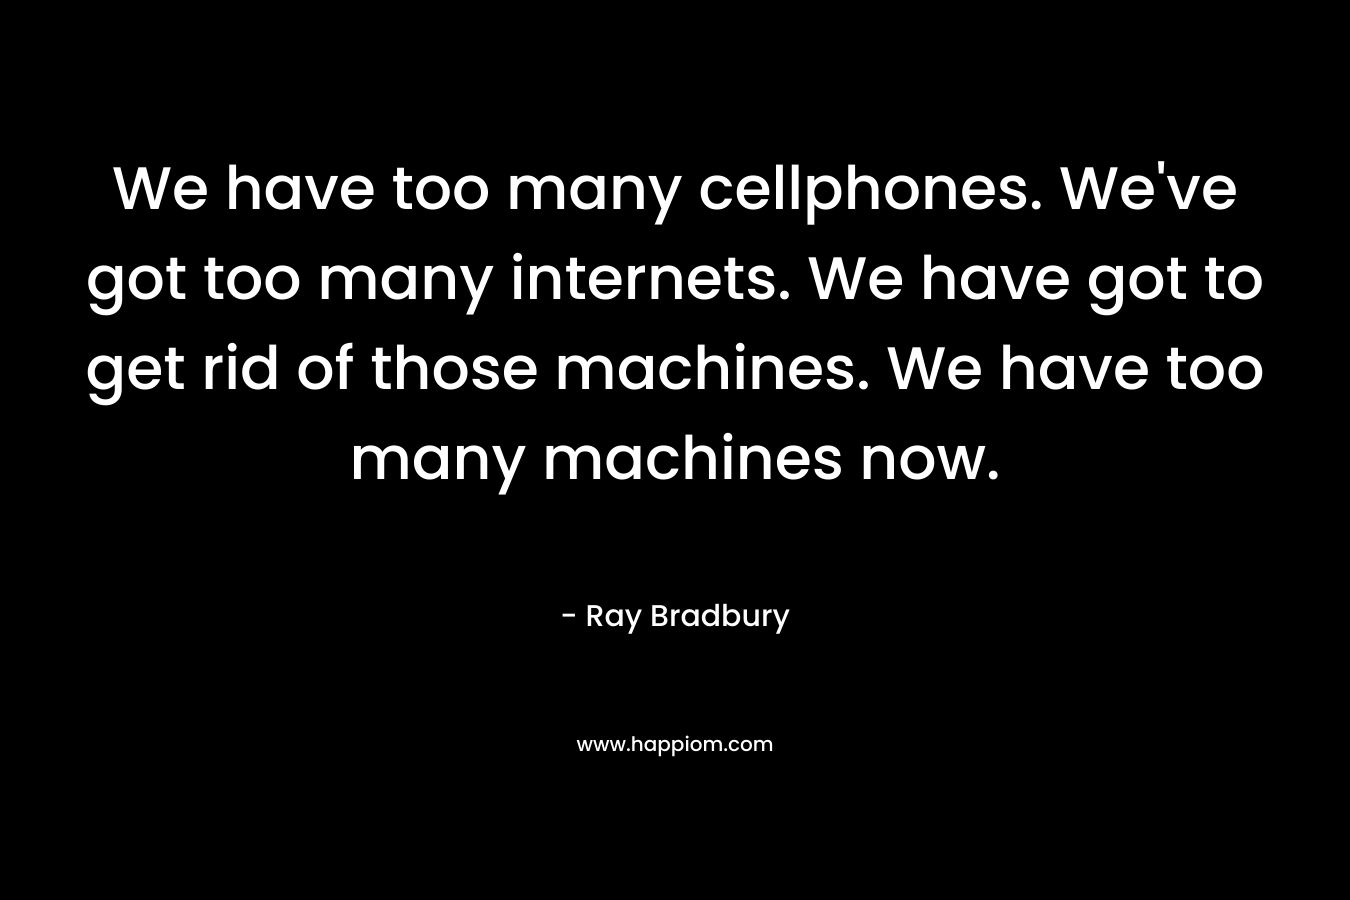 We have too many cellphones. We've got too many internets. We have got to get rid of those machines. We have too many machines now.